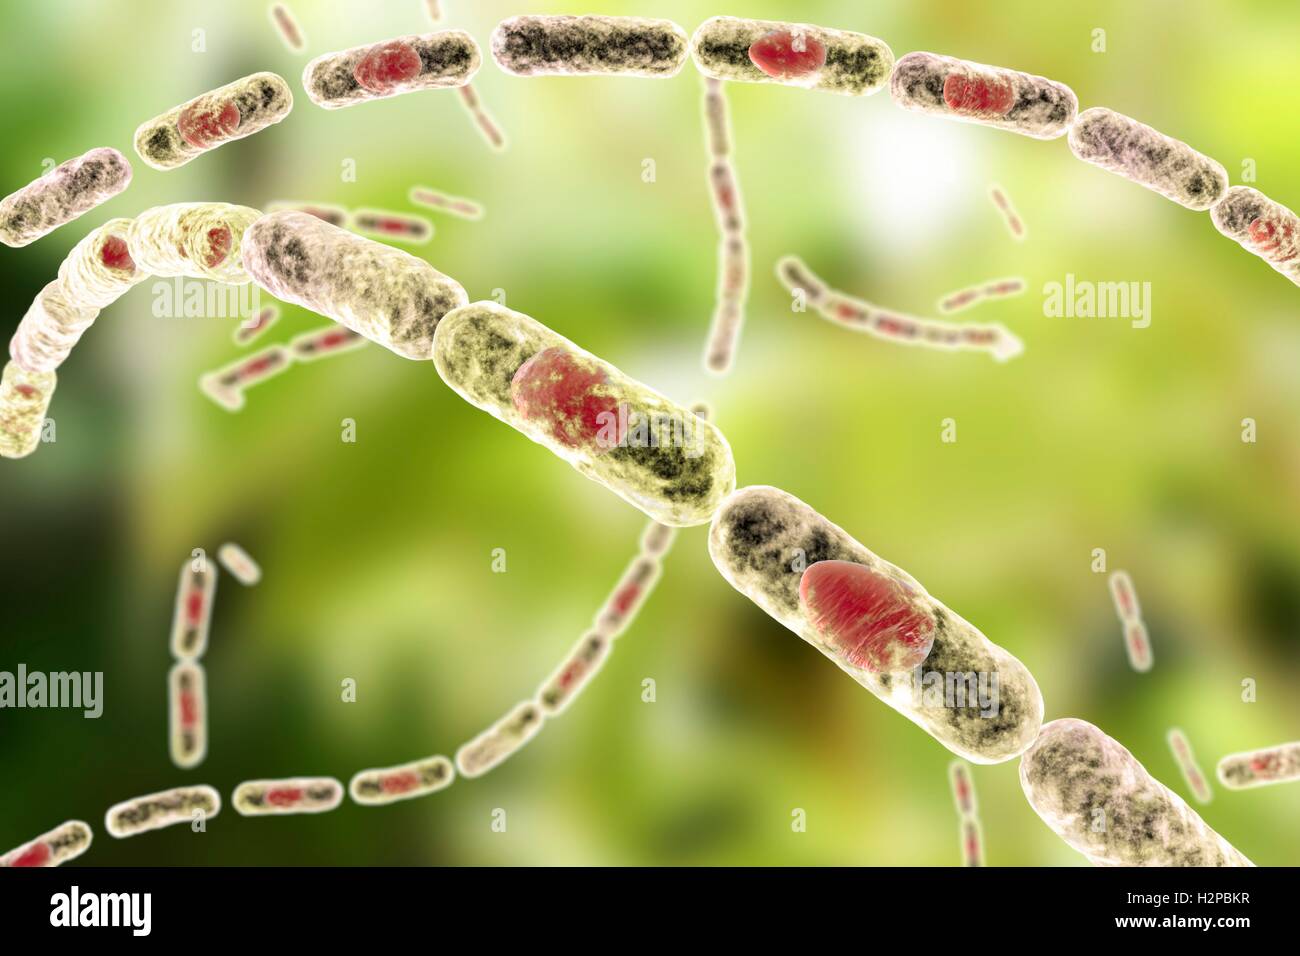 Anthrax bacteria, computer illustration. Anthrax bacteria (Bacillus anthracis) are the cause of the disease anthrax in humans and livestock. They are Gram-positive spore producing bacteria arranged in chains (streptobacilli). Many cells have a central spore (red). Stock Photo